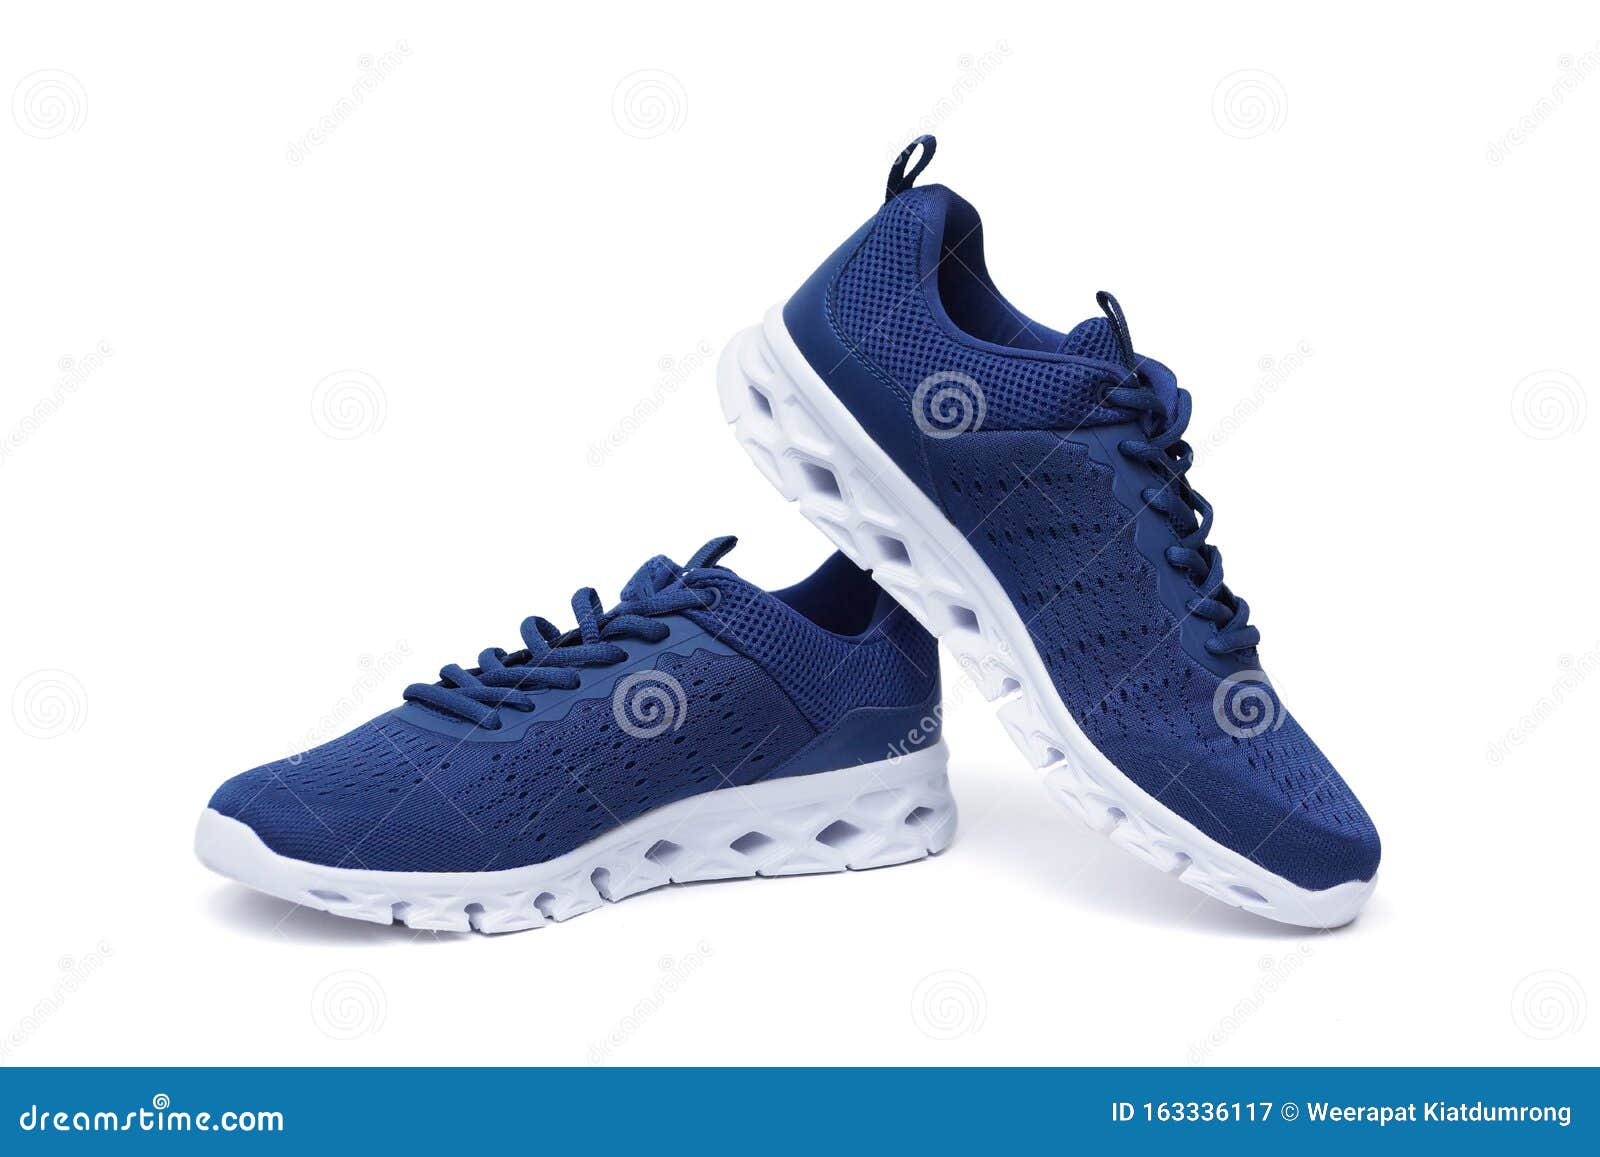 Running Shoes in Blue and White Color Stock Image - Image of isolated ...